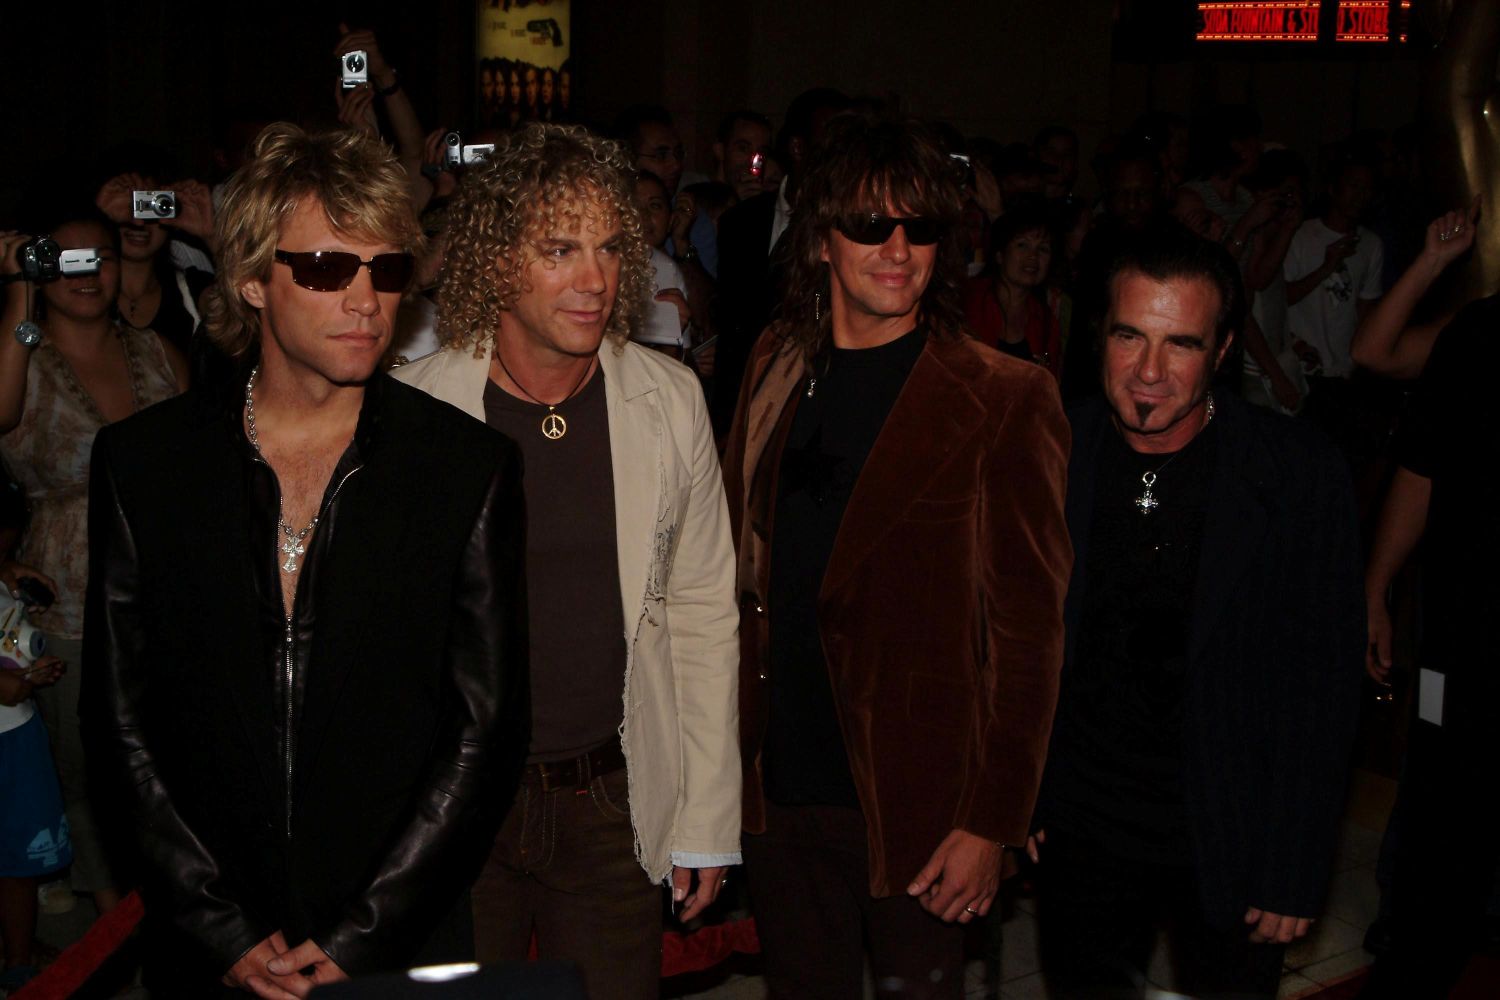 <p>The band’s debut album, the self-titled <em>Bon Jovi</em>, was released in 1984 and included their first hit, “Runaway”. Legend has it that Jon first got the idea for this monster hit on the bus ride to work at the Power Station.</p>